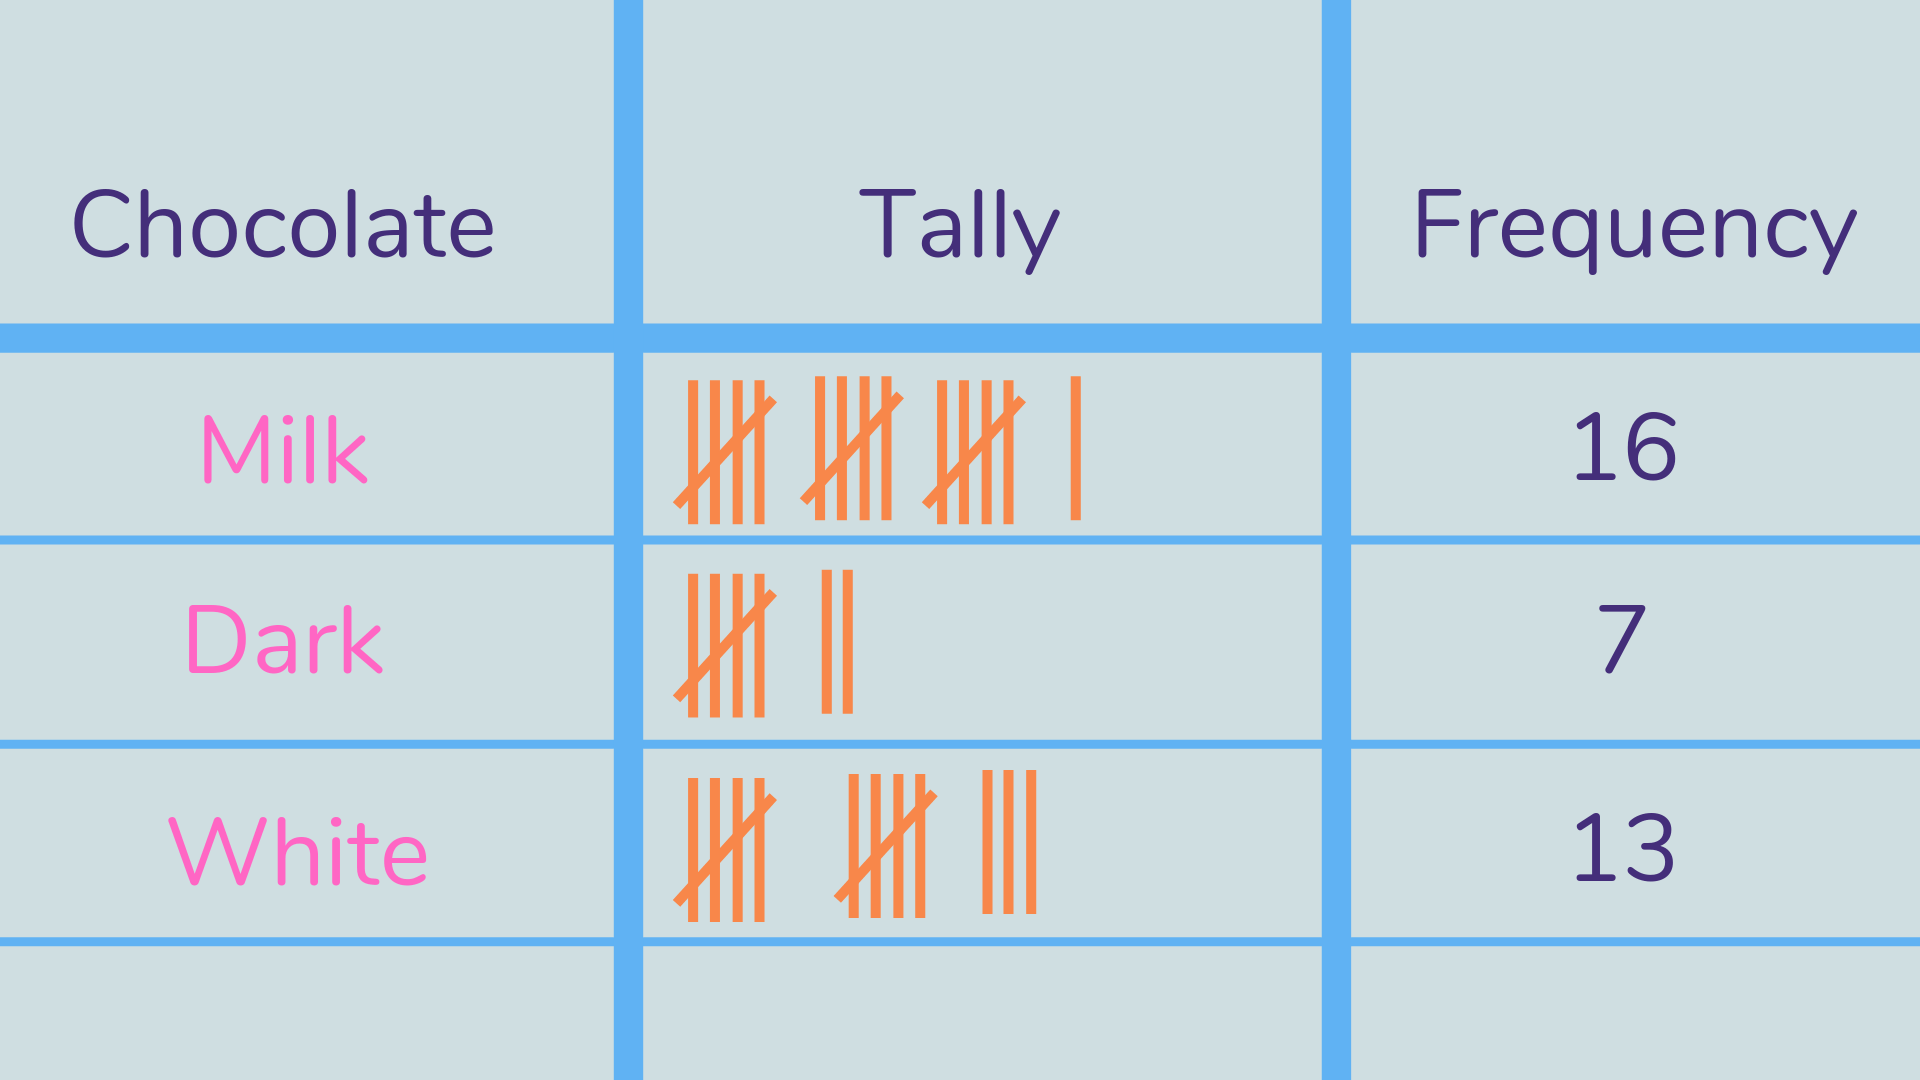 example tally chart showing chocolate preference